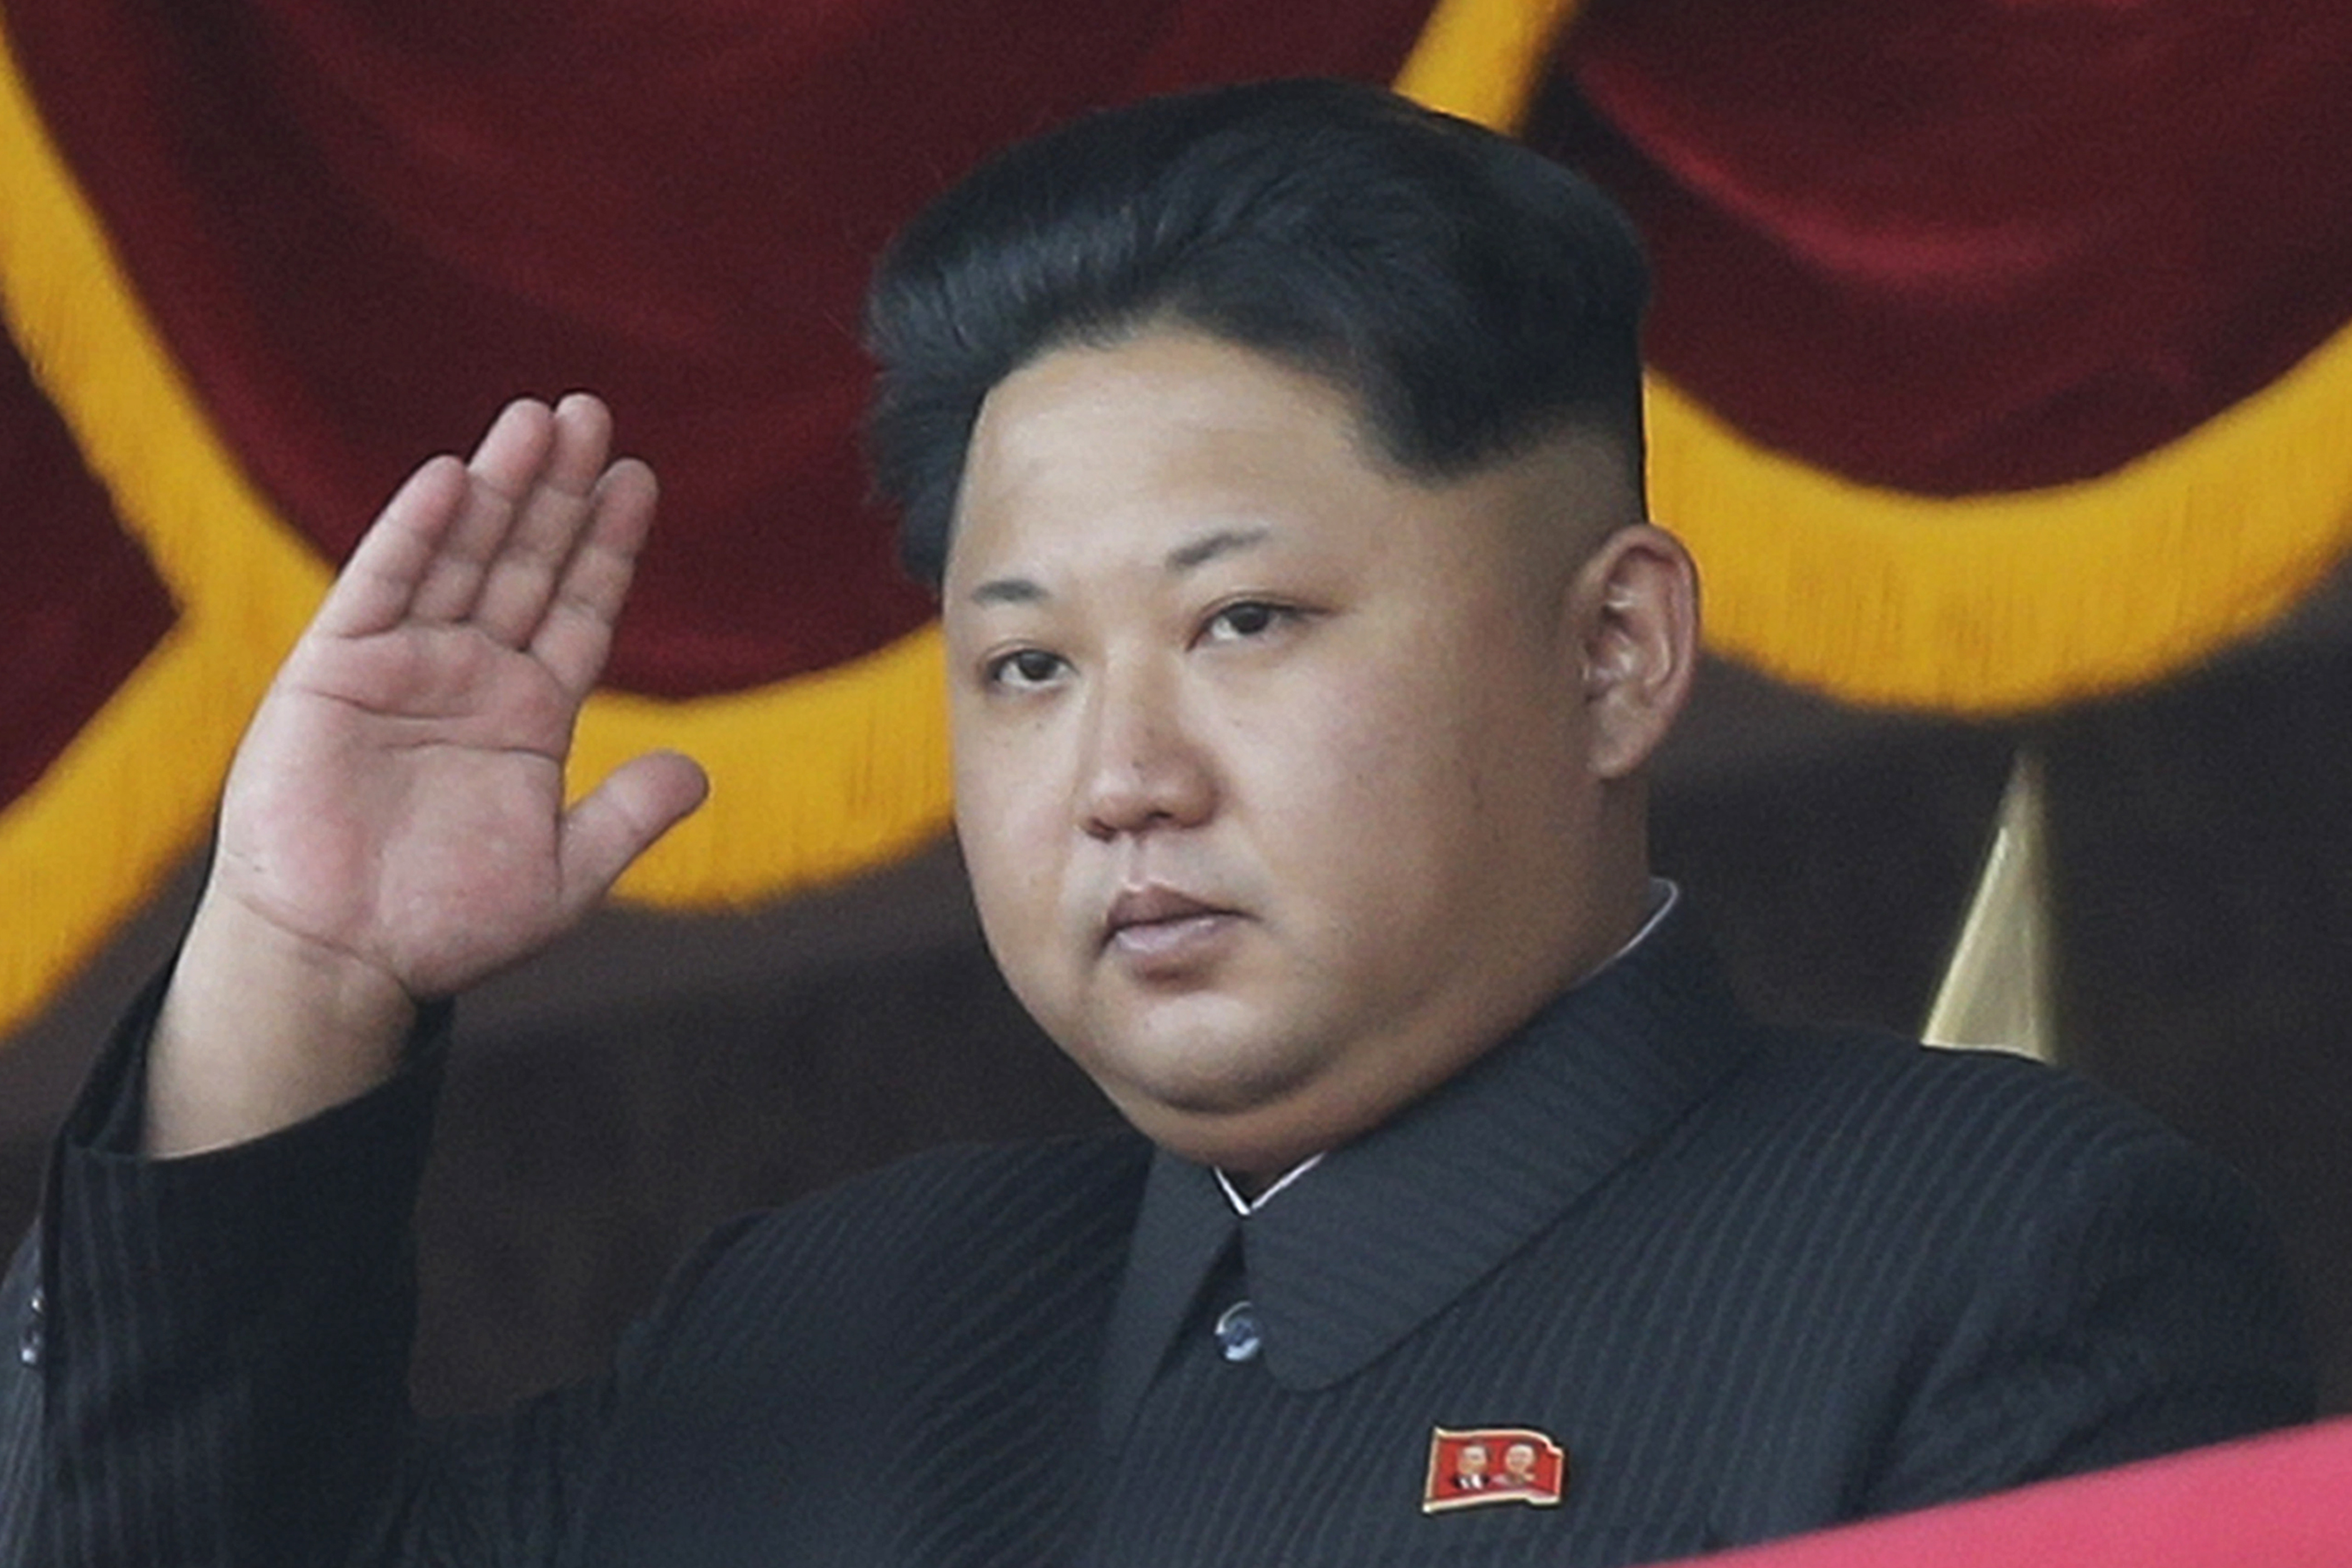 North Korean leader Kim Jong Un in grave danger after surgery reports say   WFLA